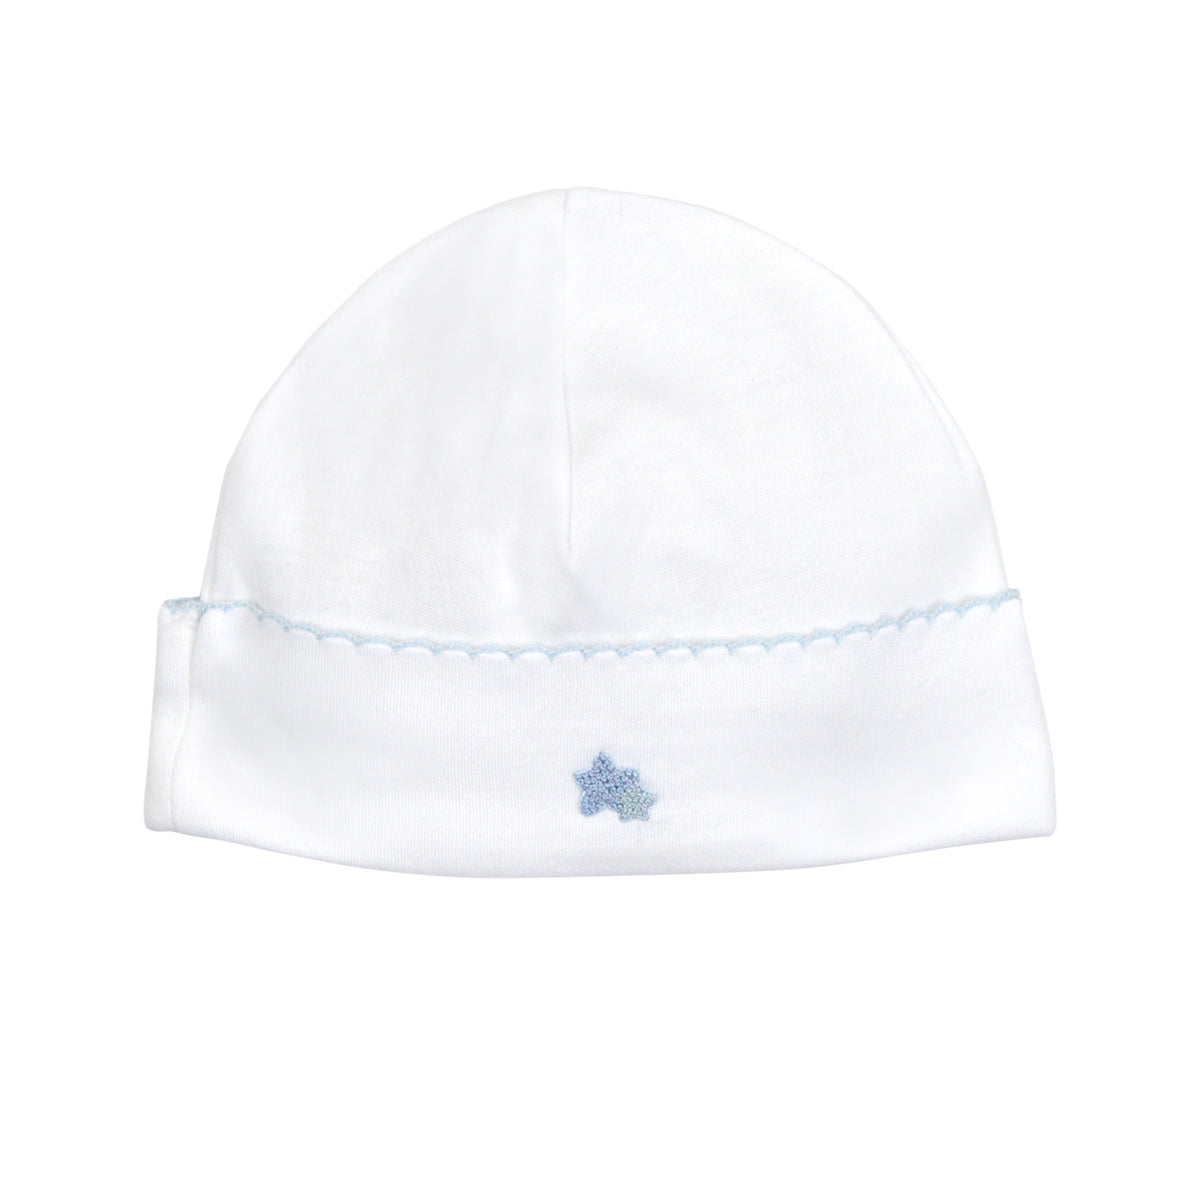 PIMA COTTON DOUBLE STARS EMBROIDERY HAT